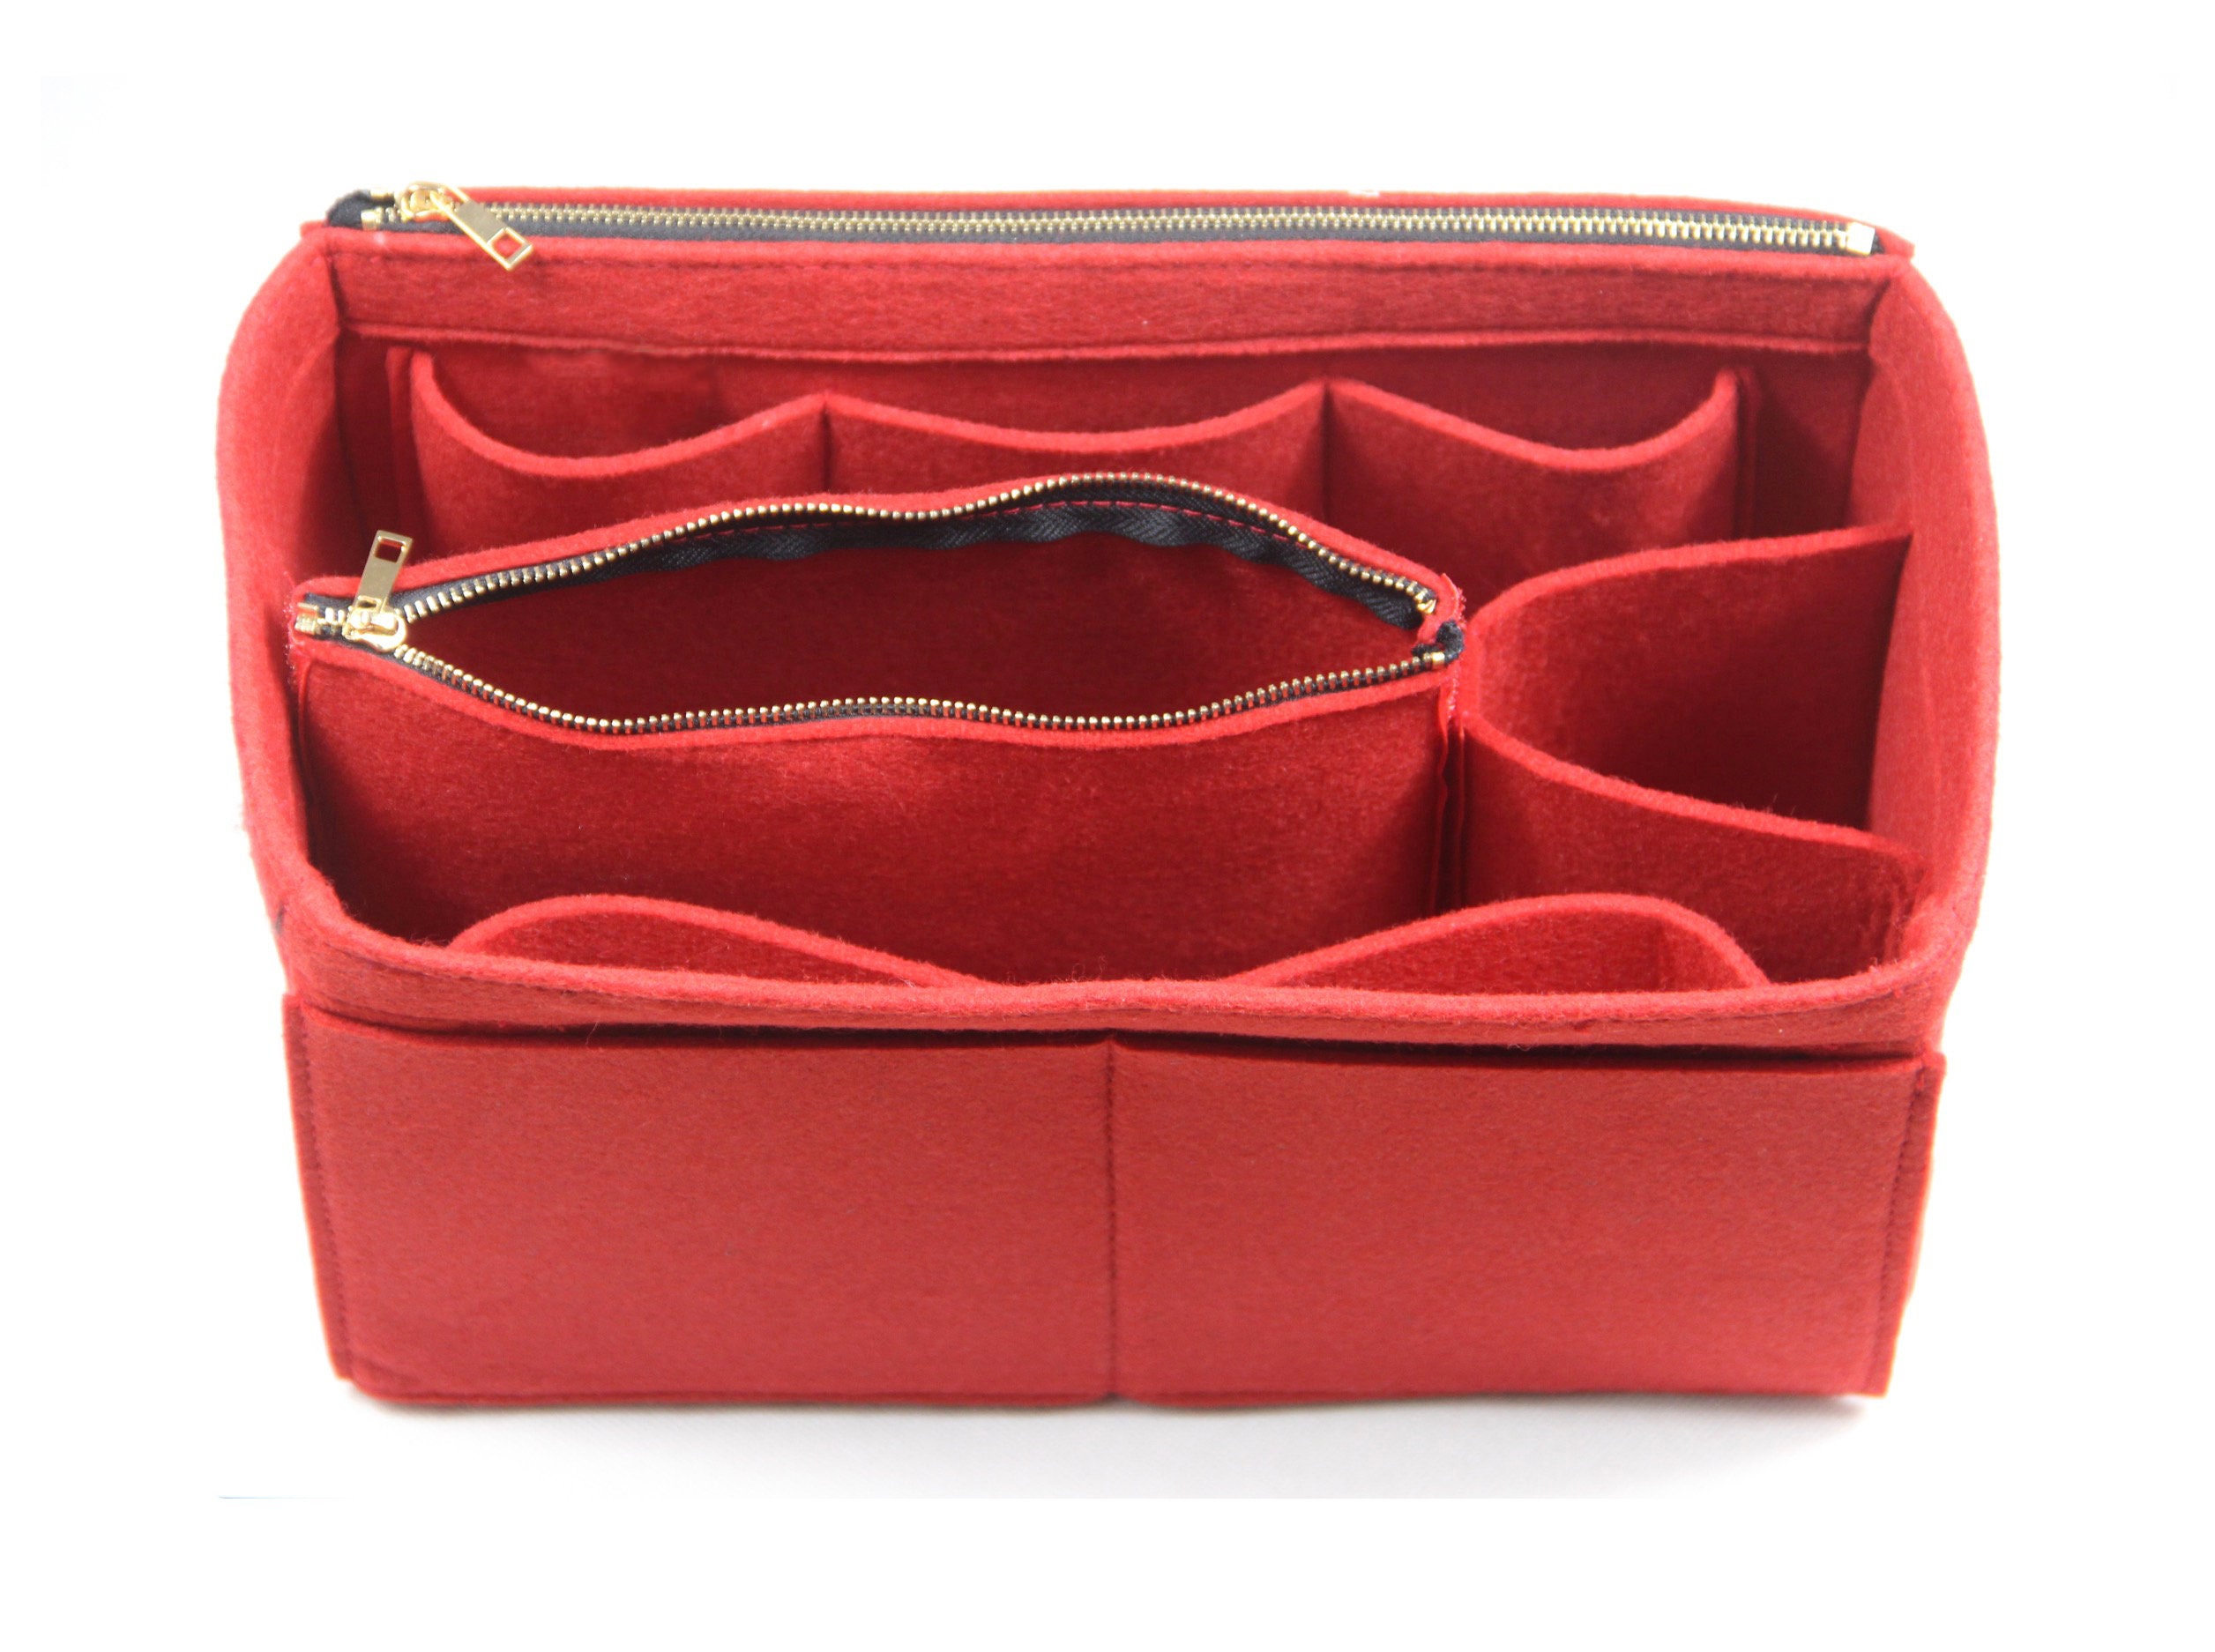 IENA PM Organizer] Felt Purse Insert with Middle Zip Pouch, Customize